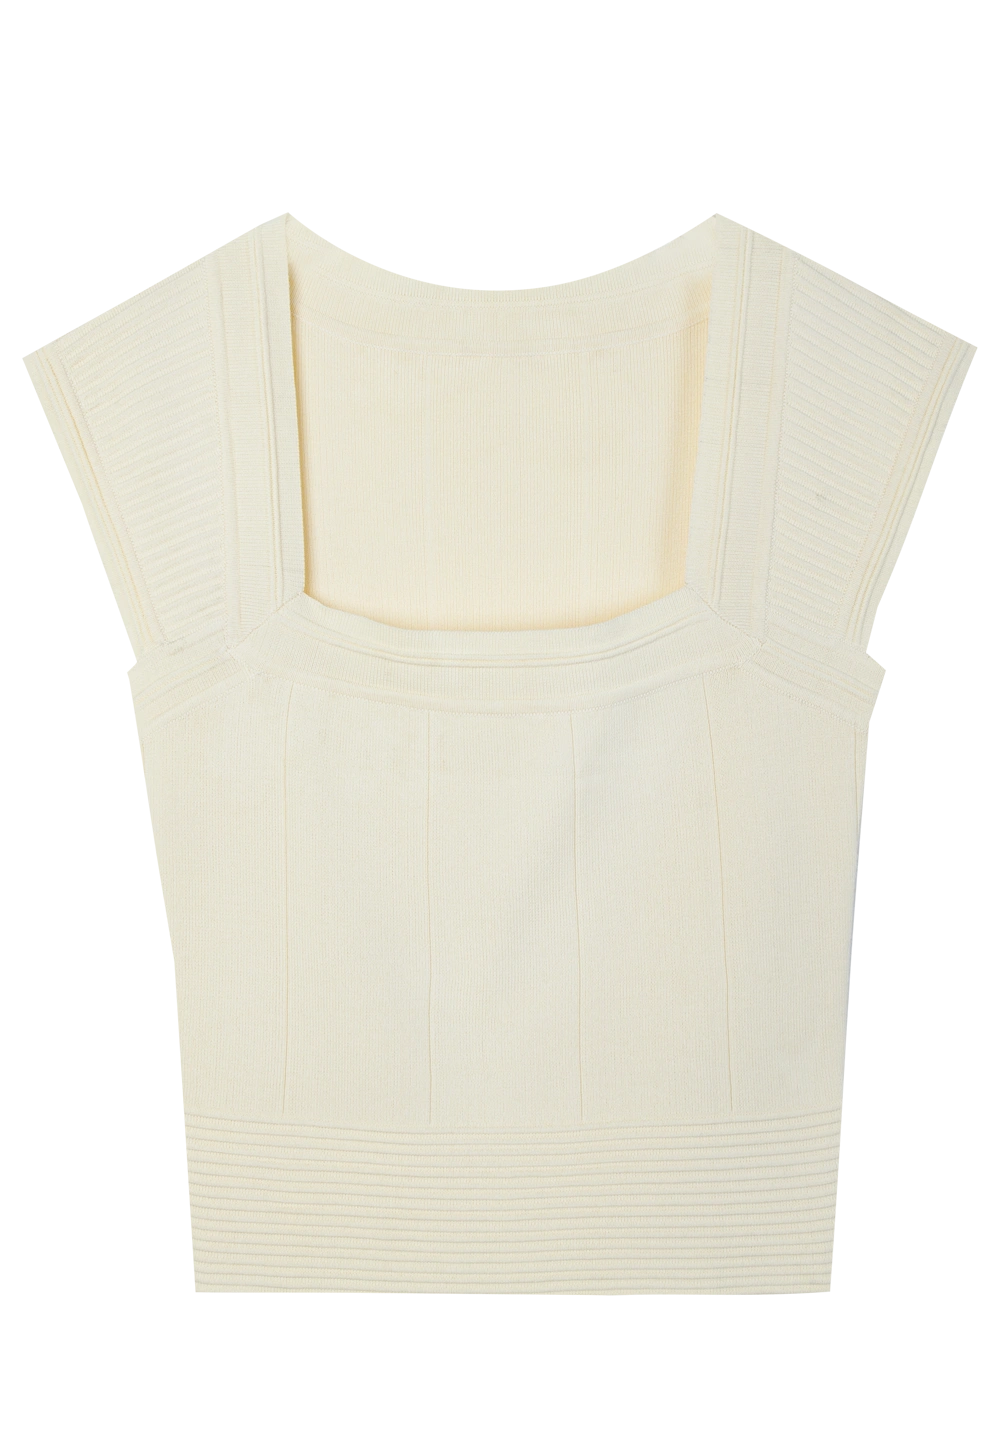 Women's Sleeveless Knit Top in Soft Yellow with Structured Design - Contemporary and Stylish